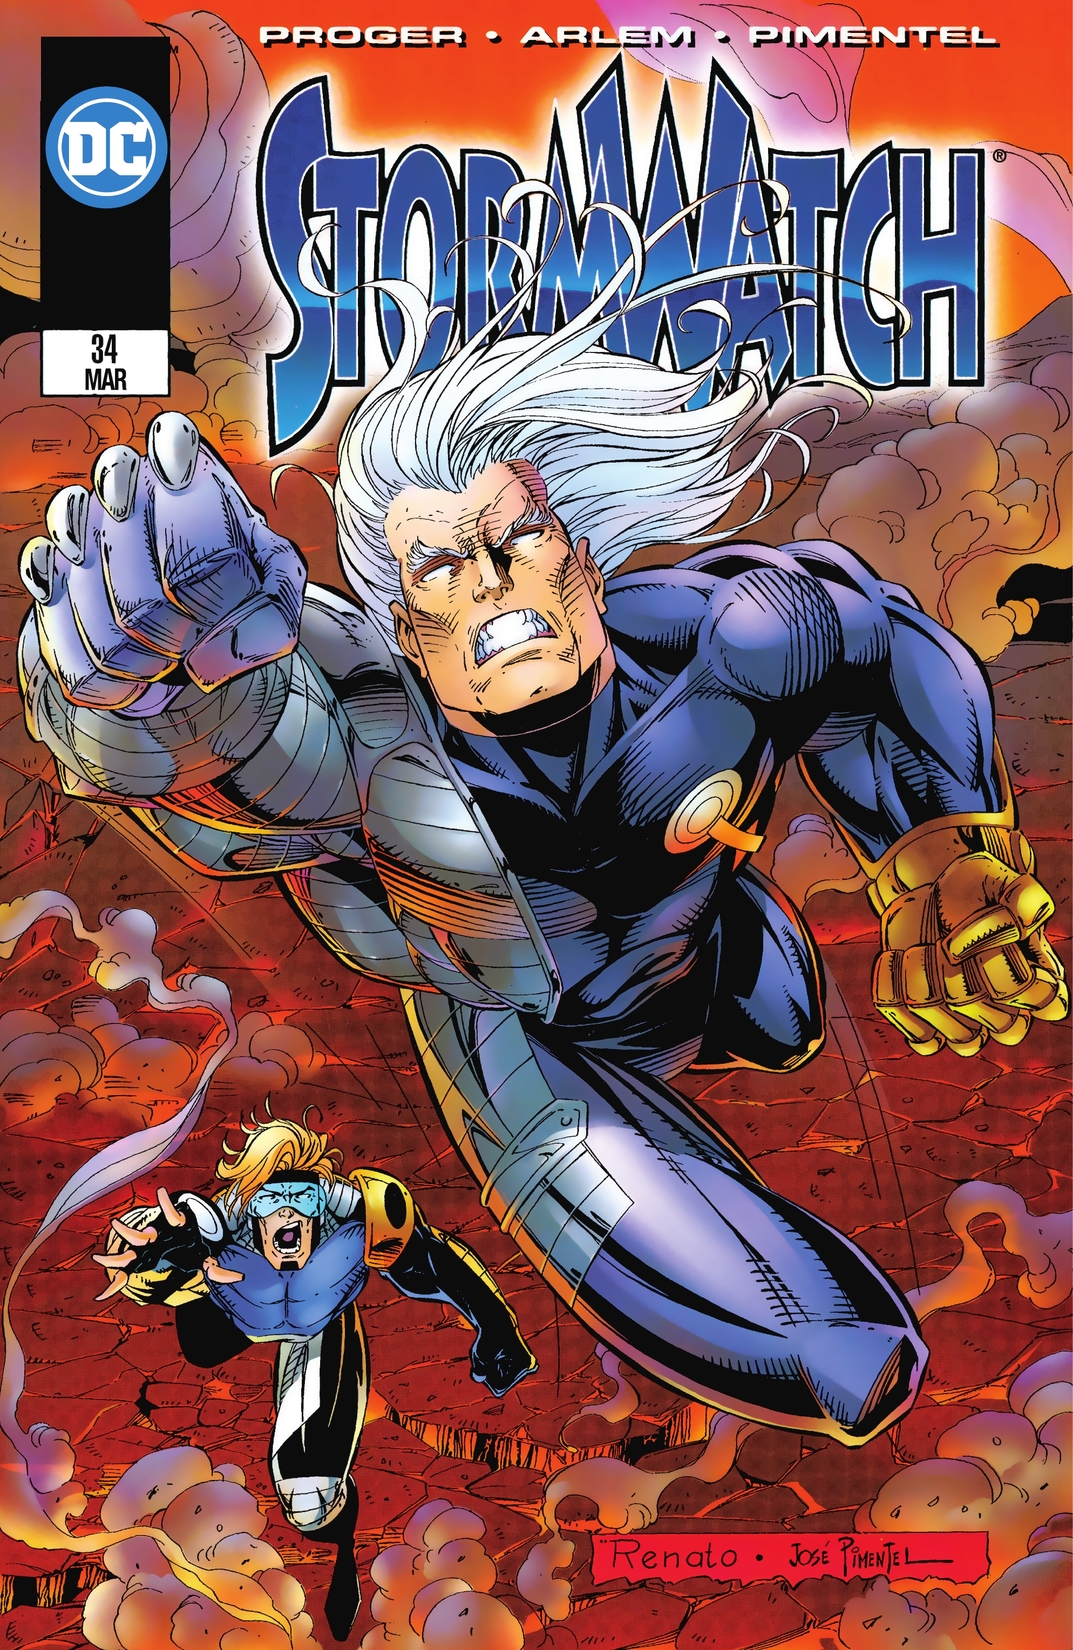 Stormwatch (1993-) #34 preview images